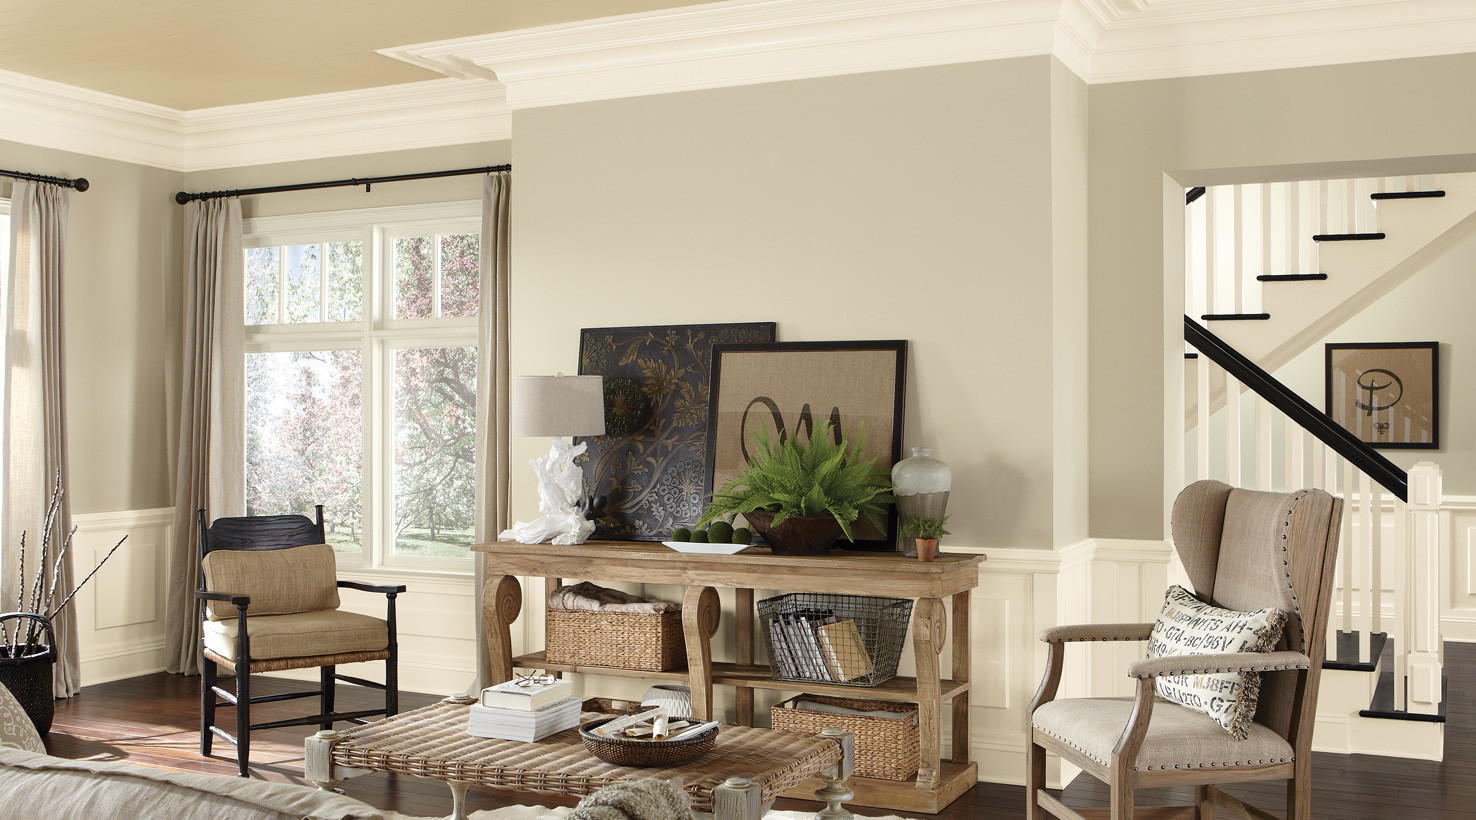 Living Room Paint Colors Pictures
 Living Room Painting Colors Ideas Deplok Painting